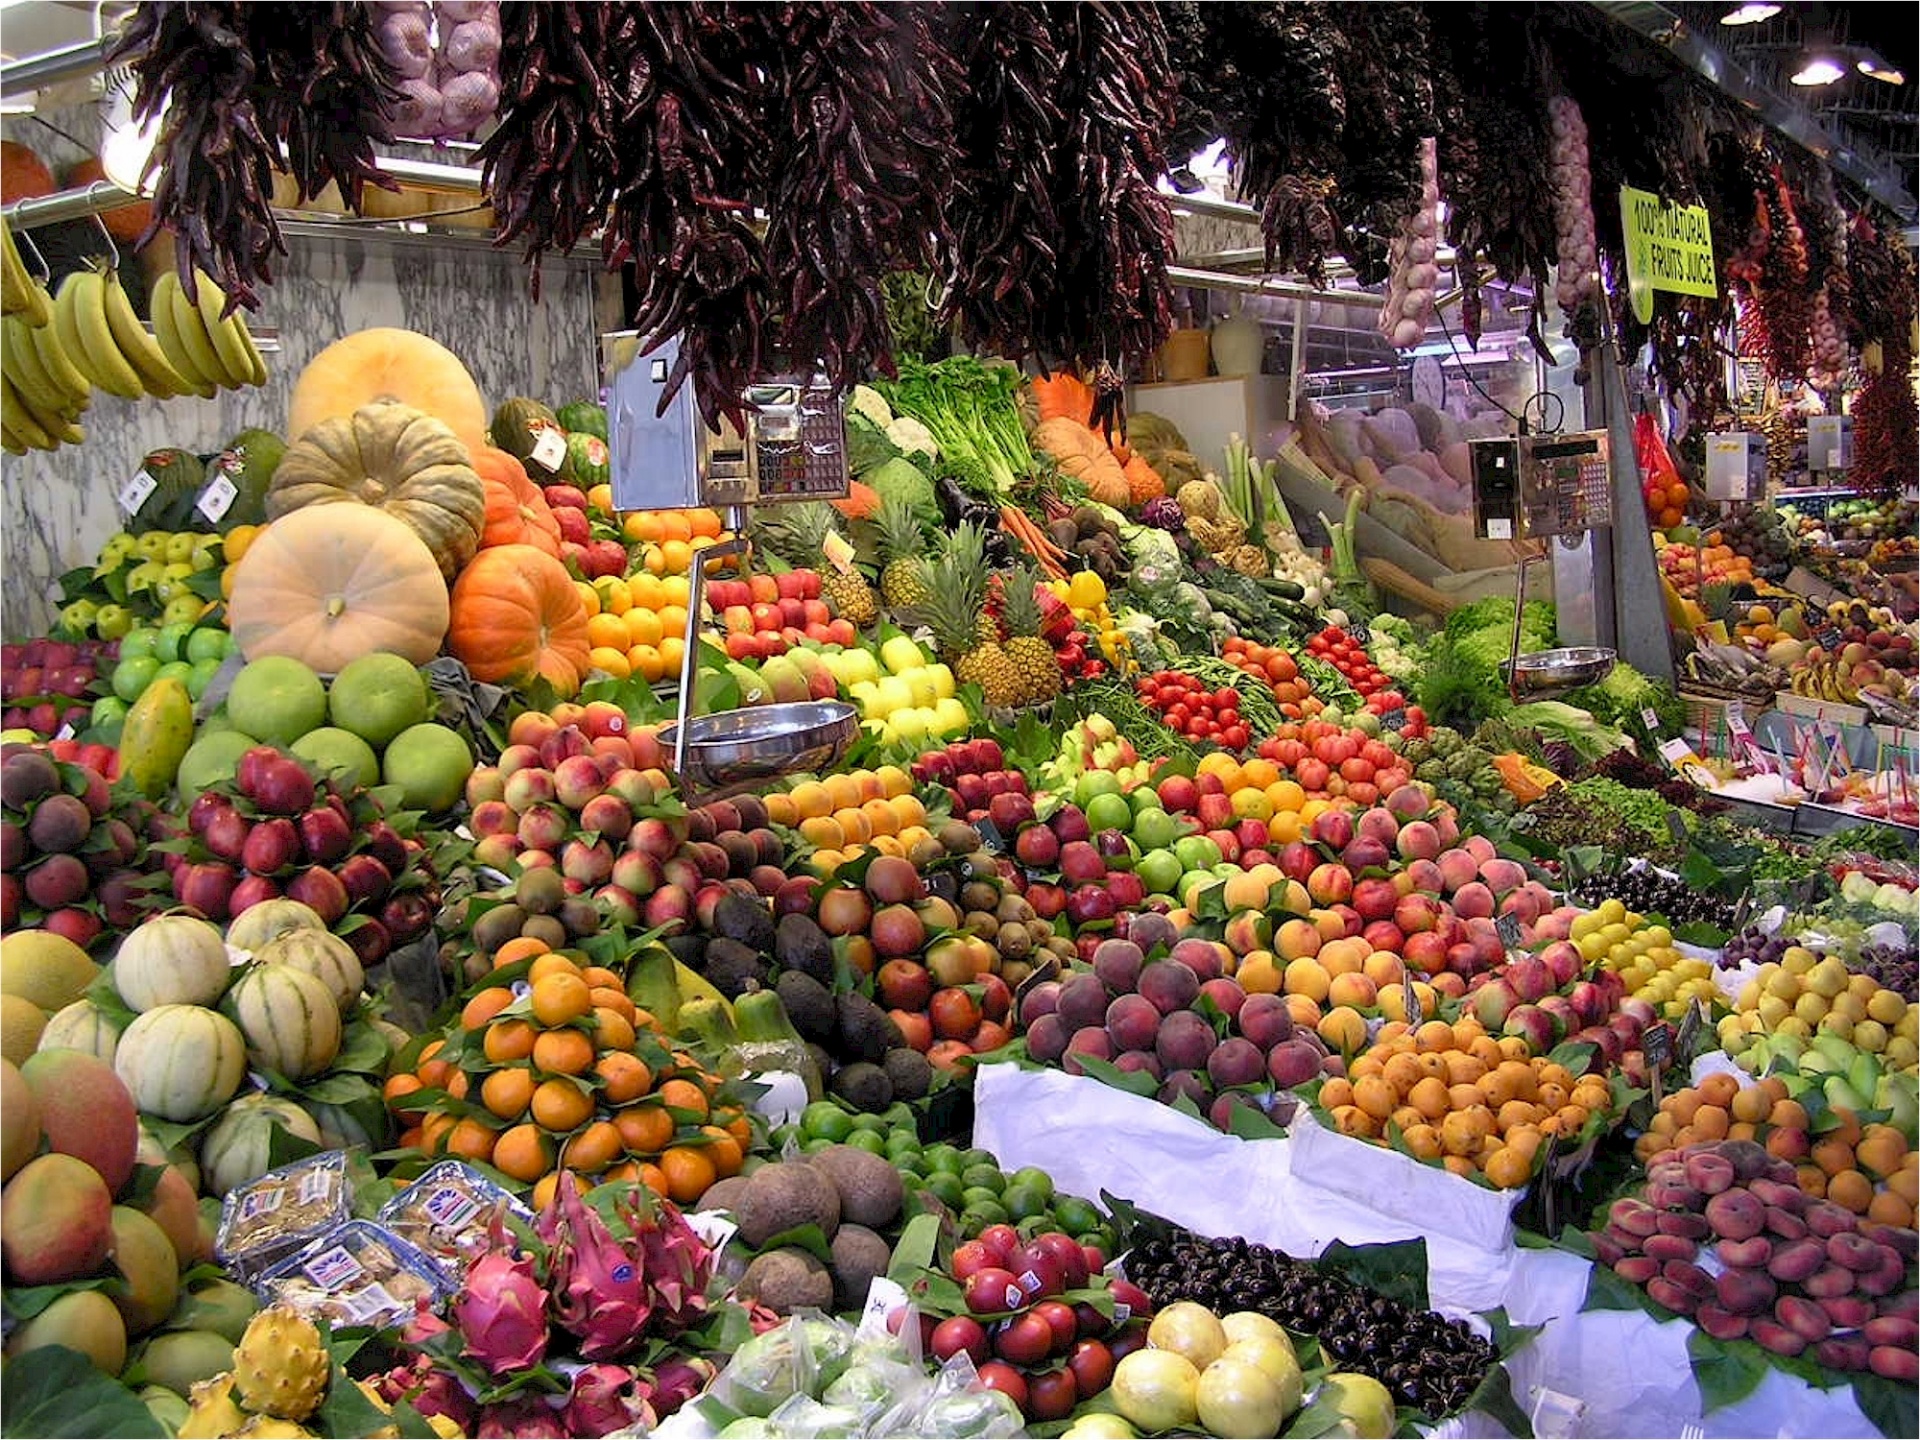 Fruits and Vegetable market in India